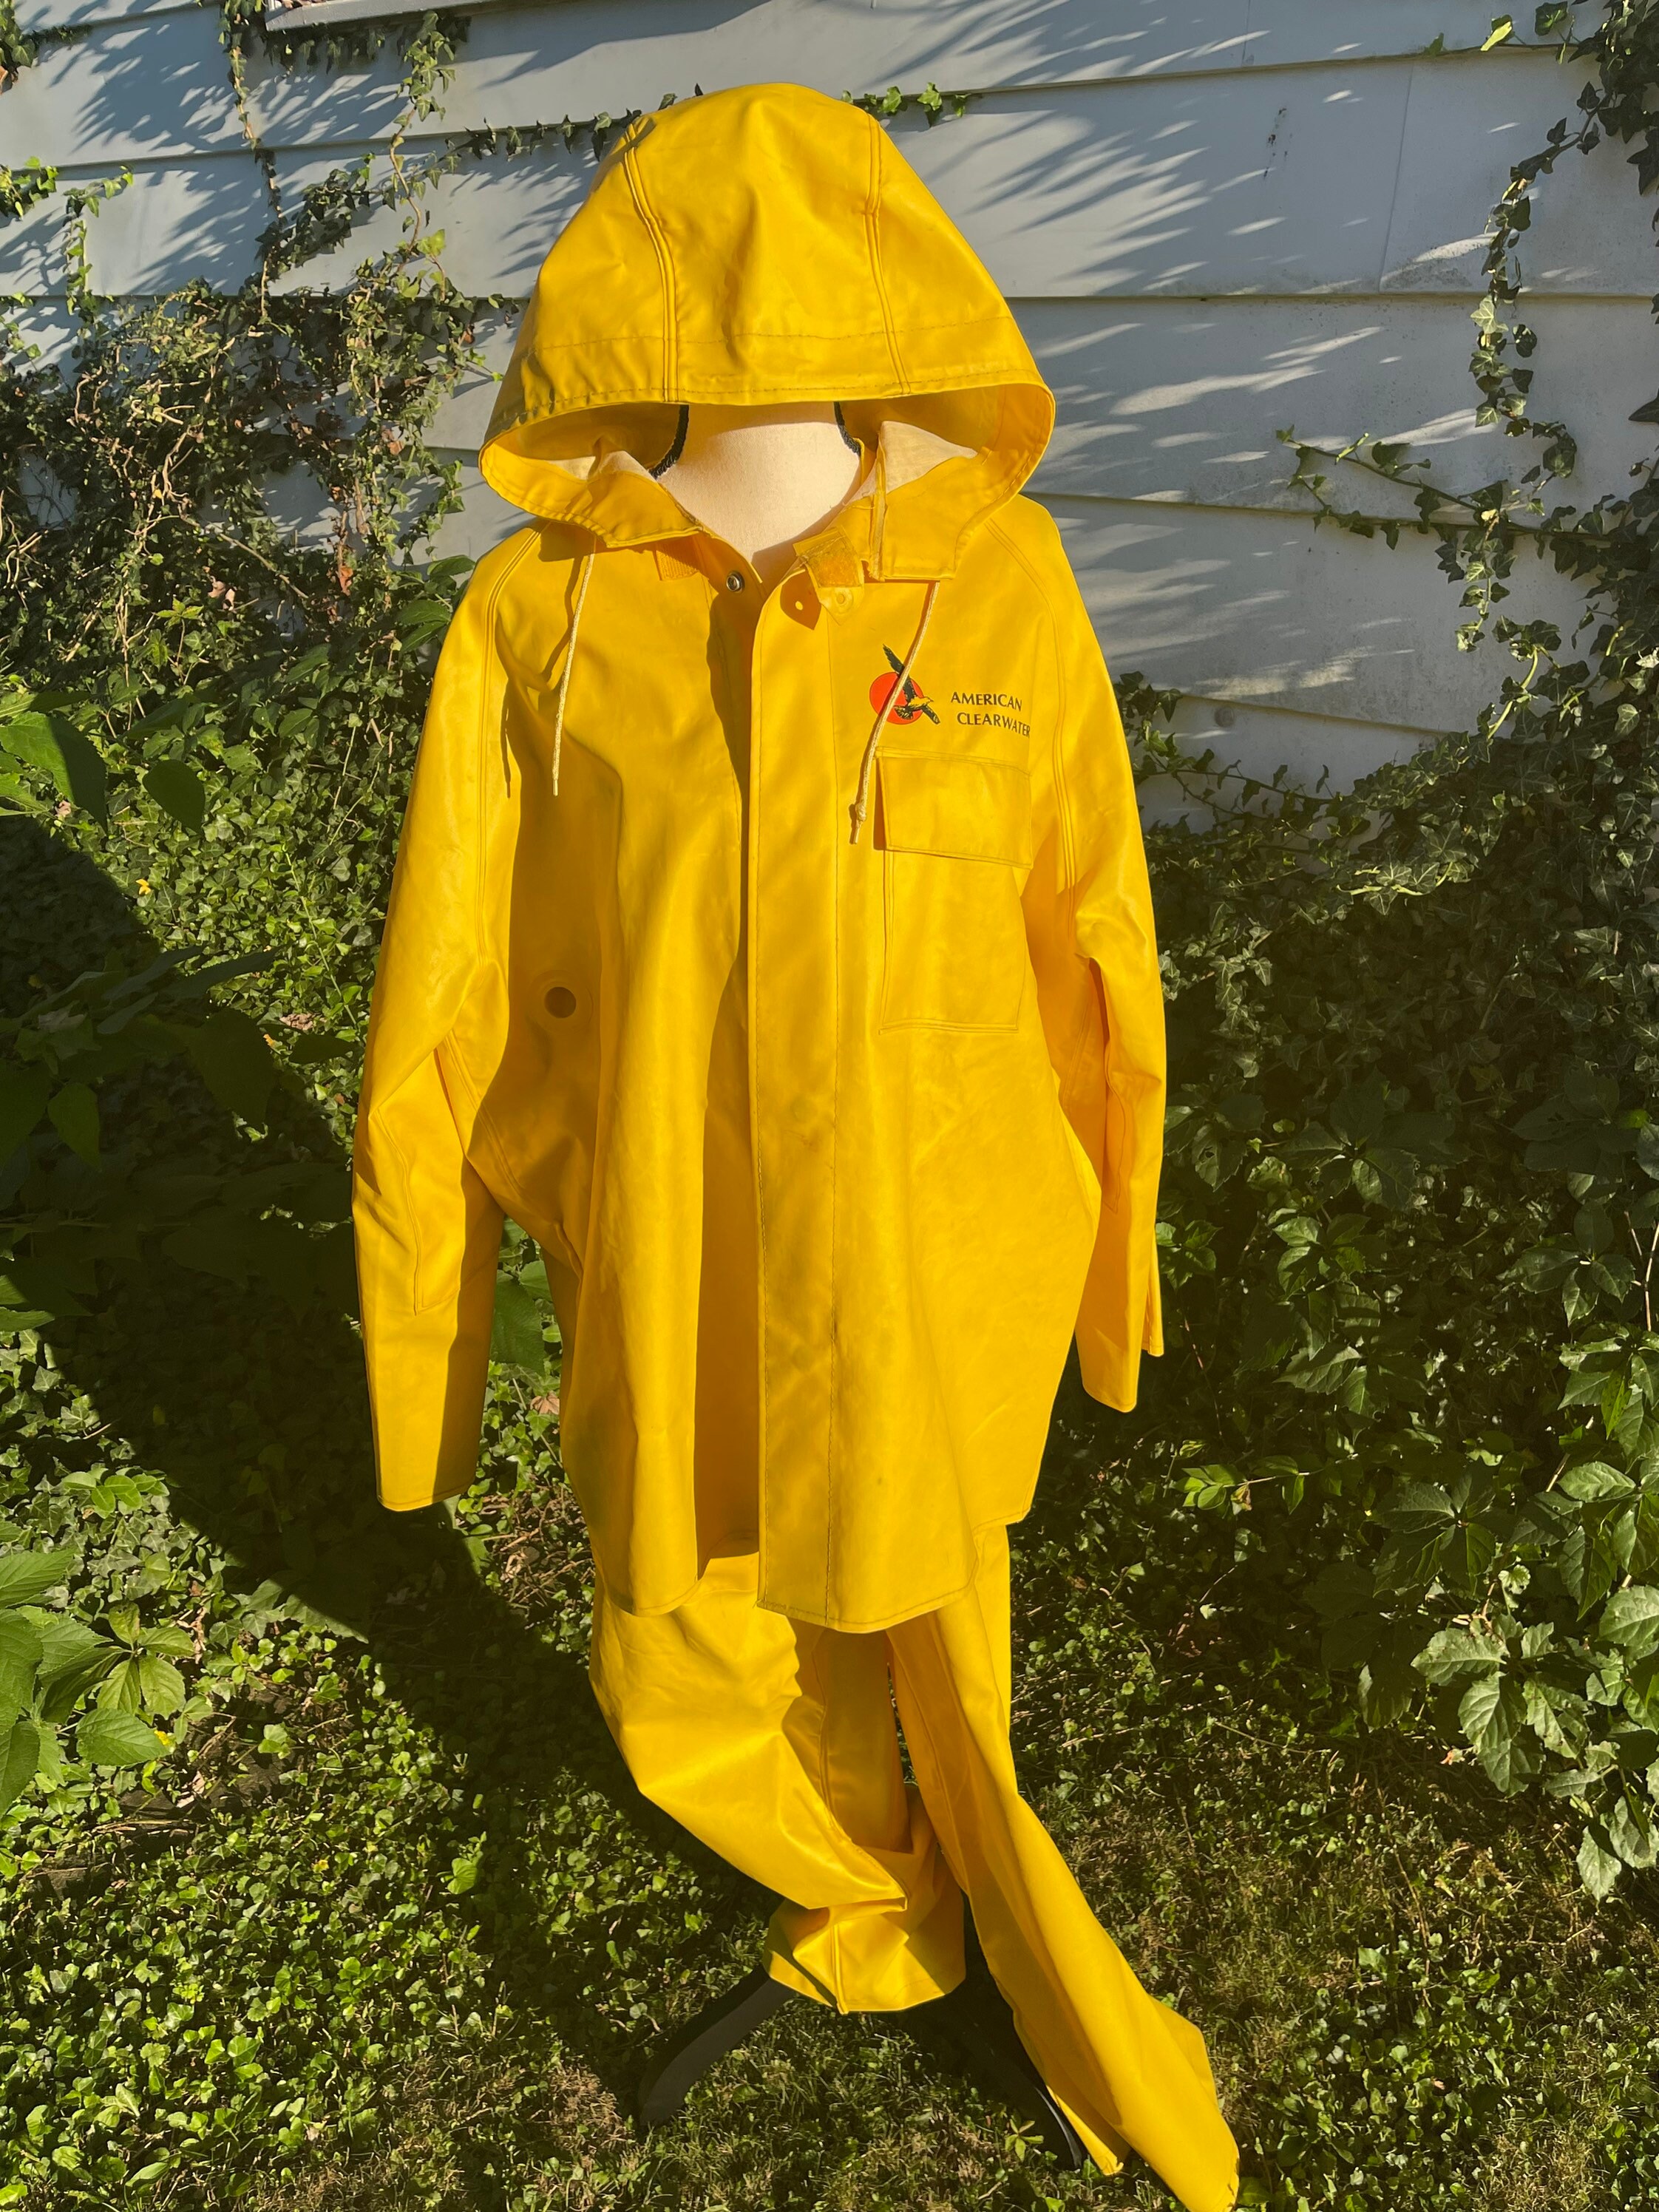 Vintage Yellow American Clearwater Double Reinforced Rain Suit pic